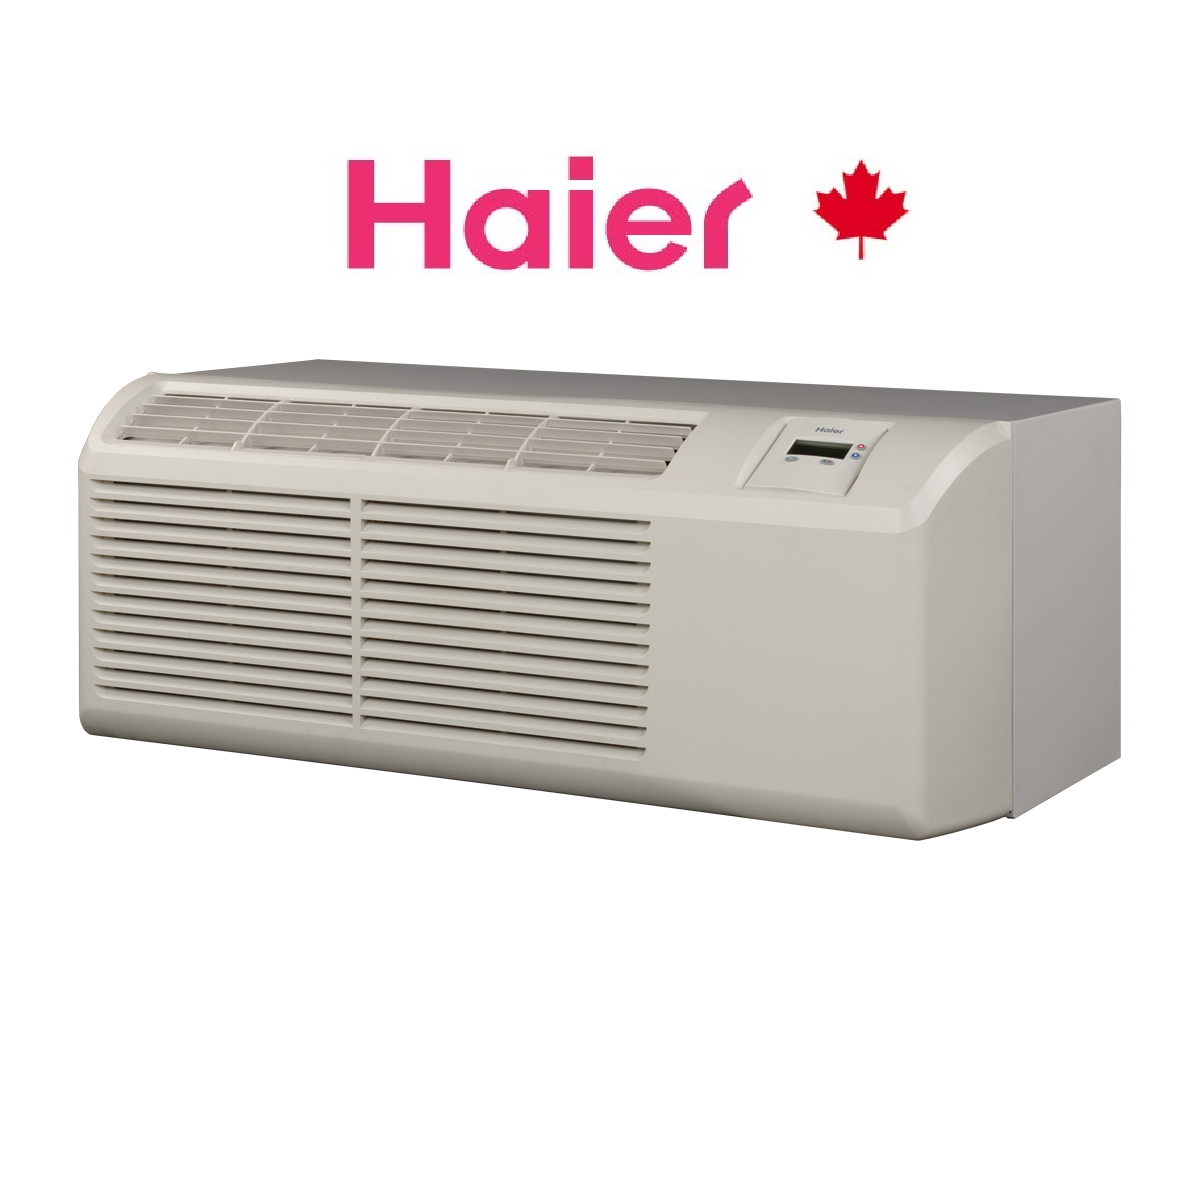 HAIER PTAC UNITS PTHH0901UAC heat pump COOLING AND HEATING